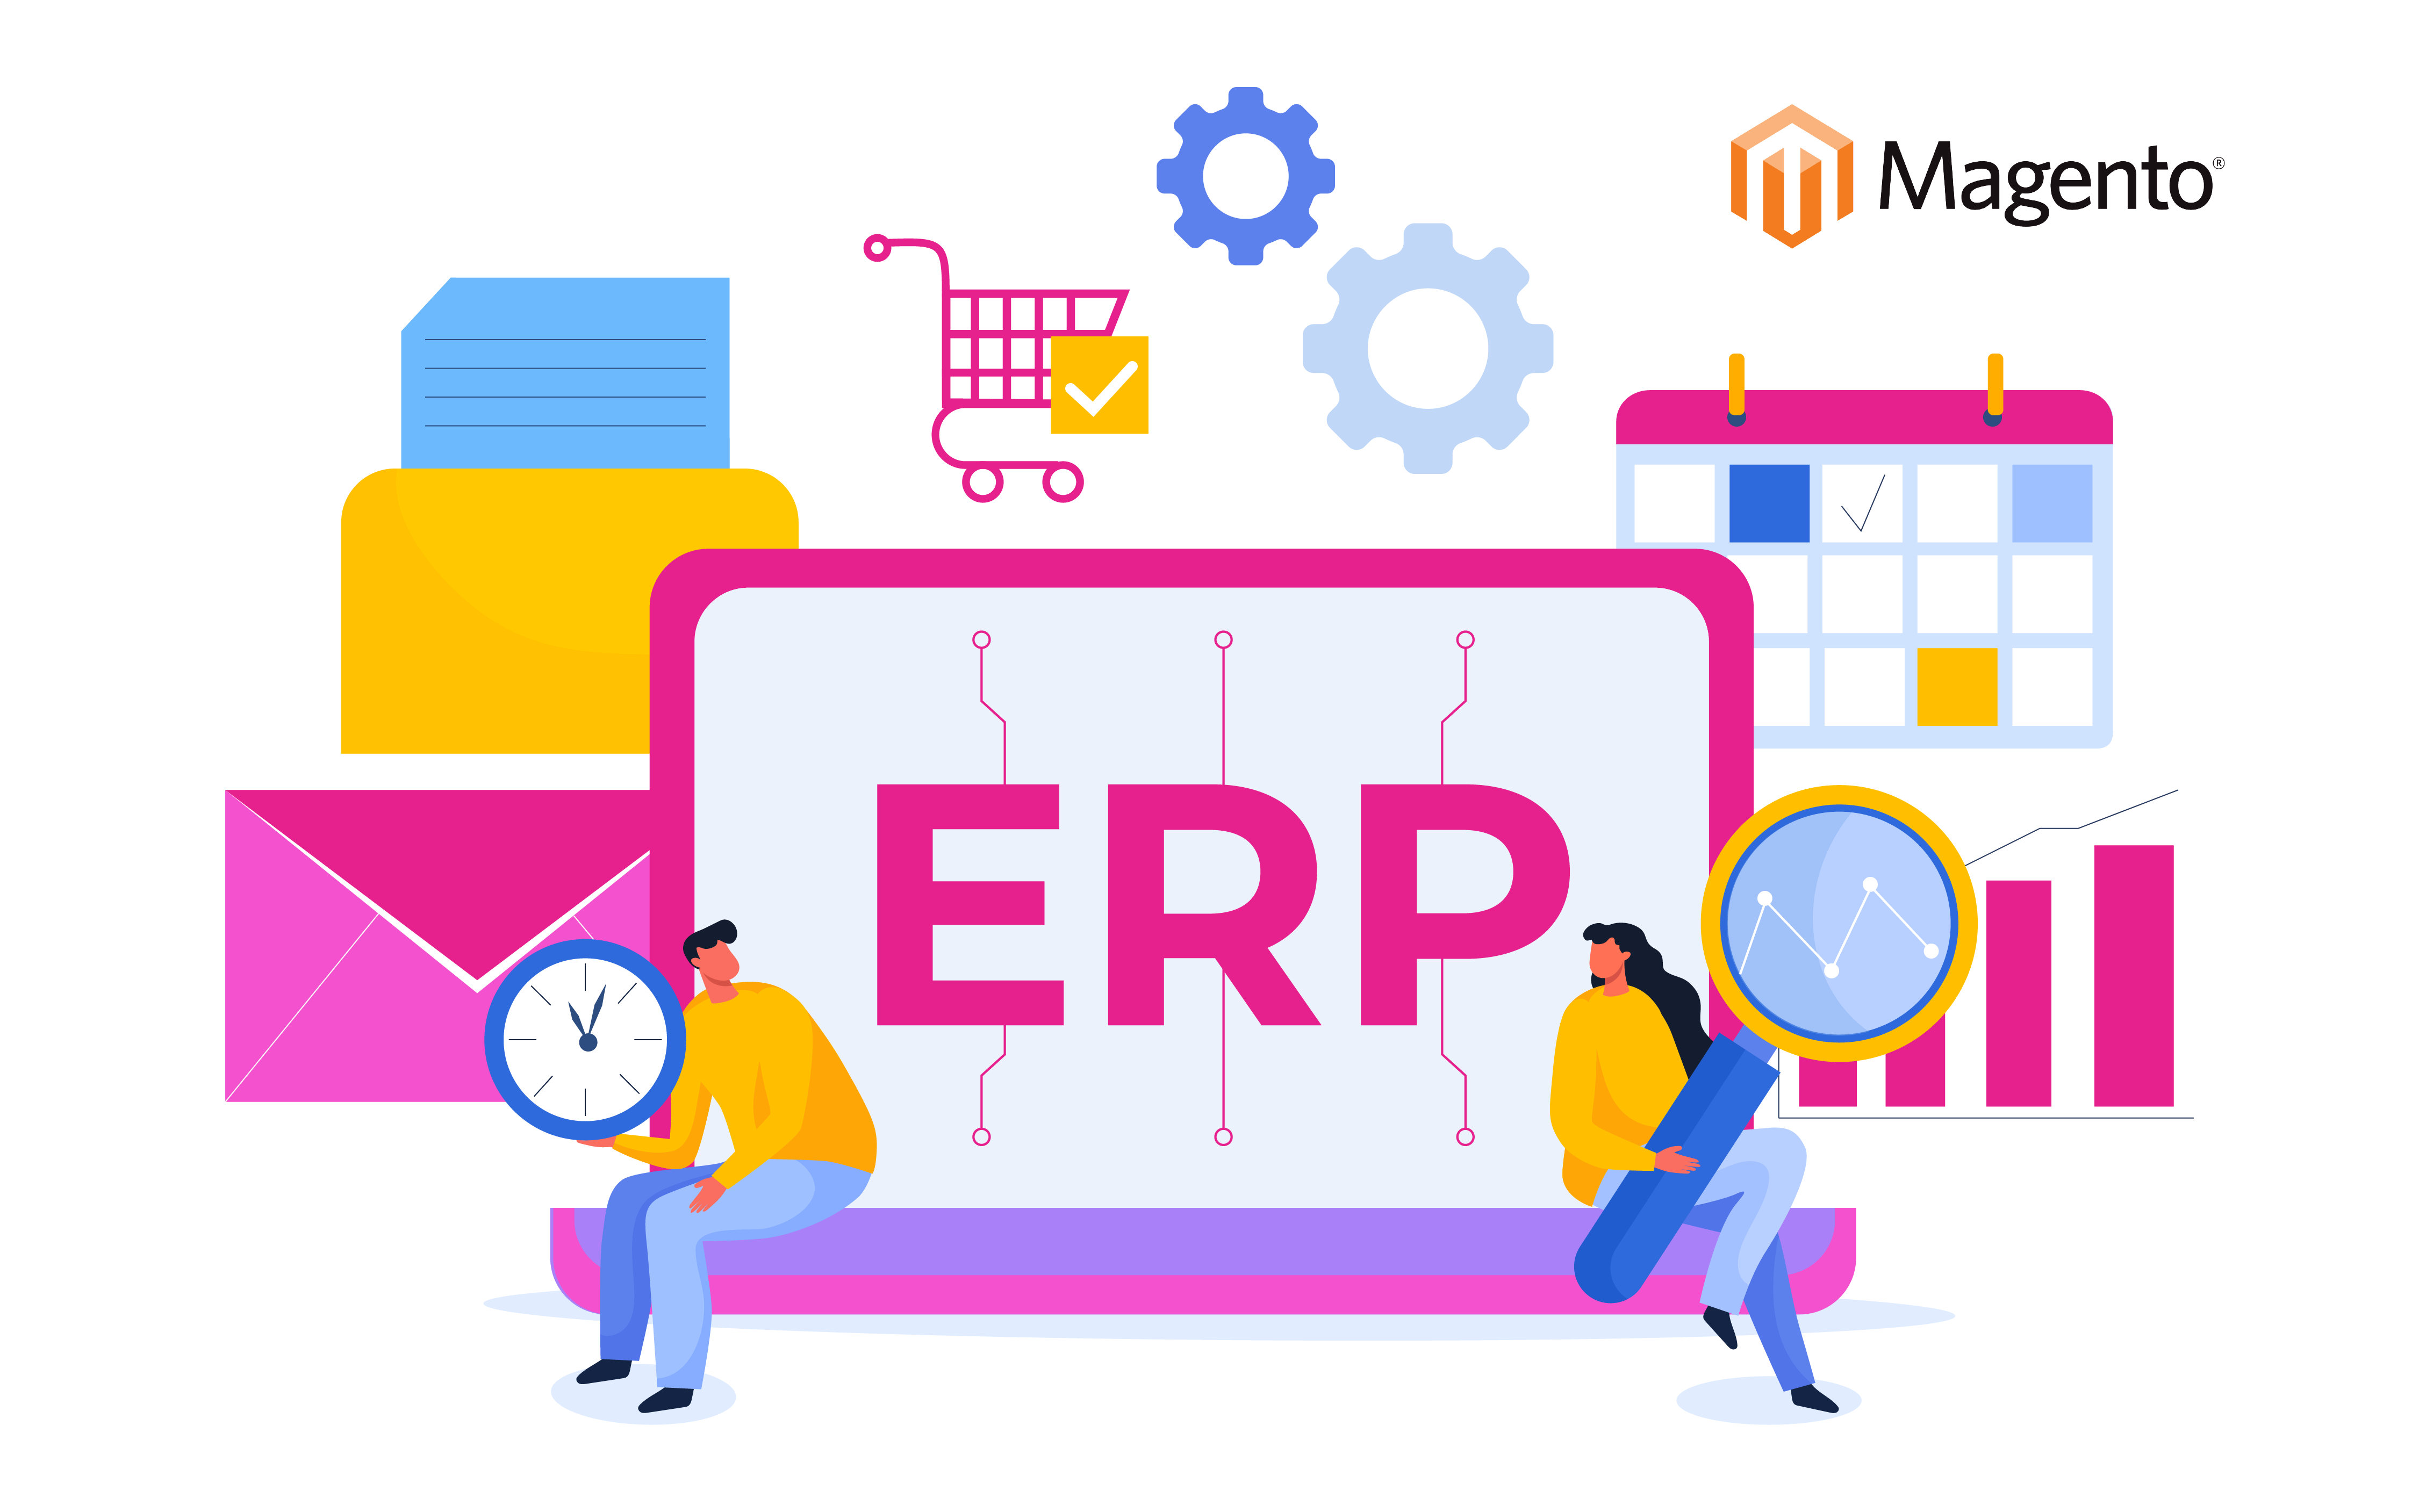 What_is_ERP_and_explain_how_it_integrates_with_your_Magento_store